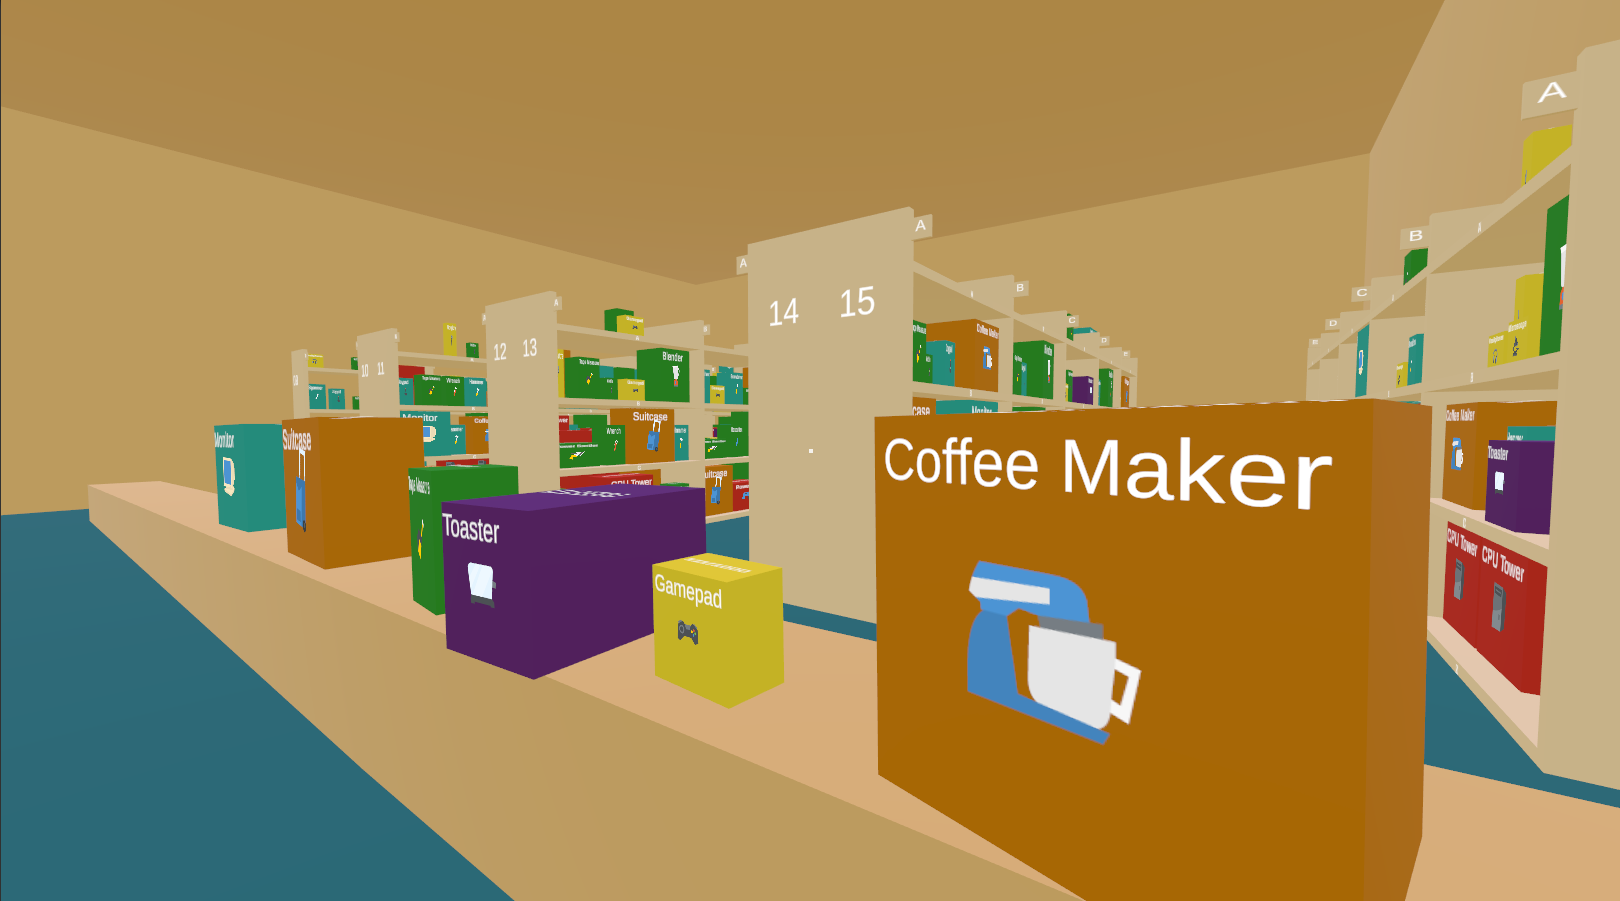 A screenshot shows a 3D stockroom with lots of colourful items filling the many shelves.